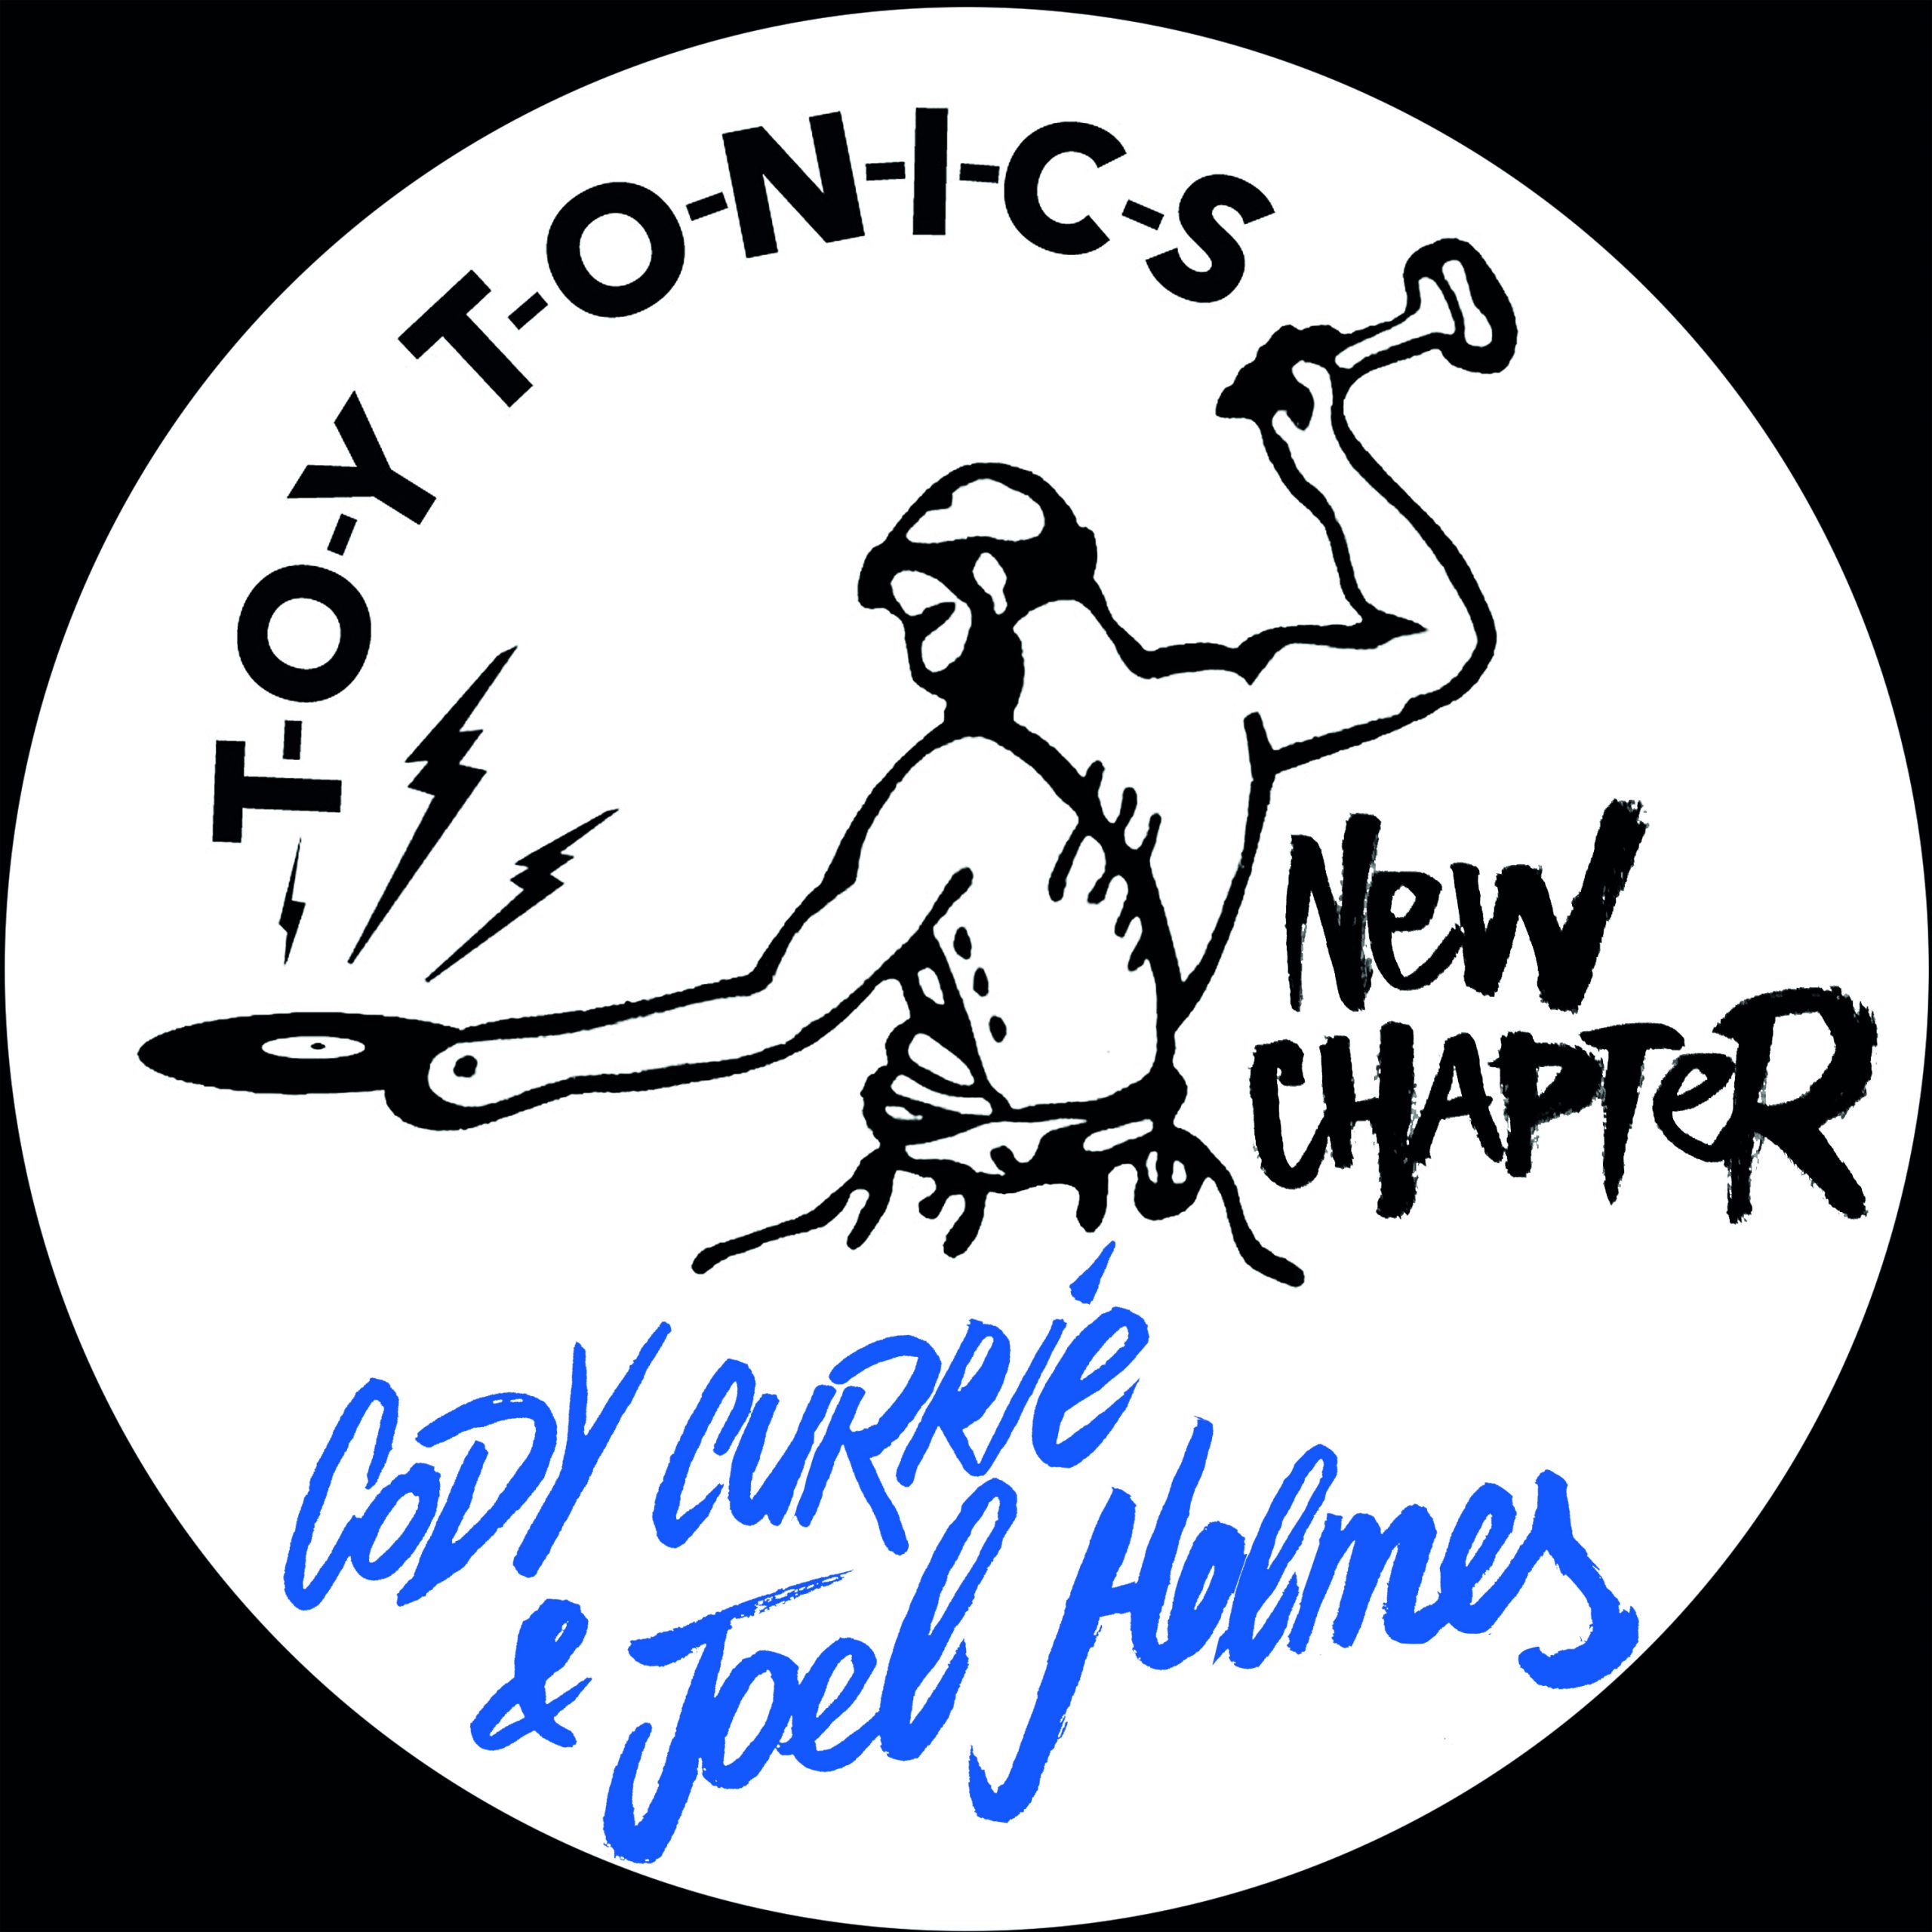 Cody Currie & Joel Holmes - New Chapter [TOYT103]